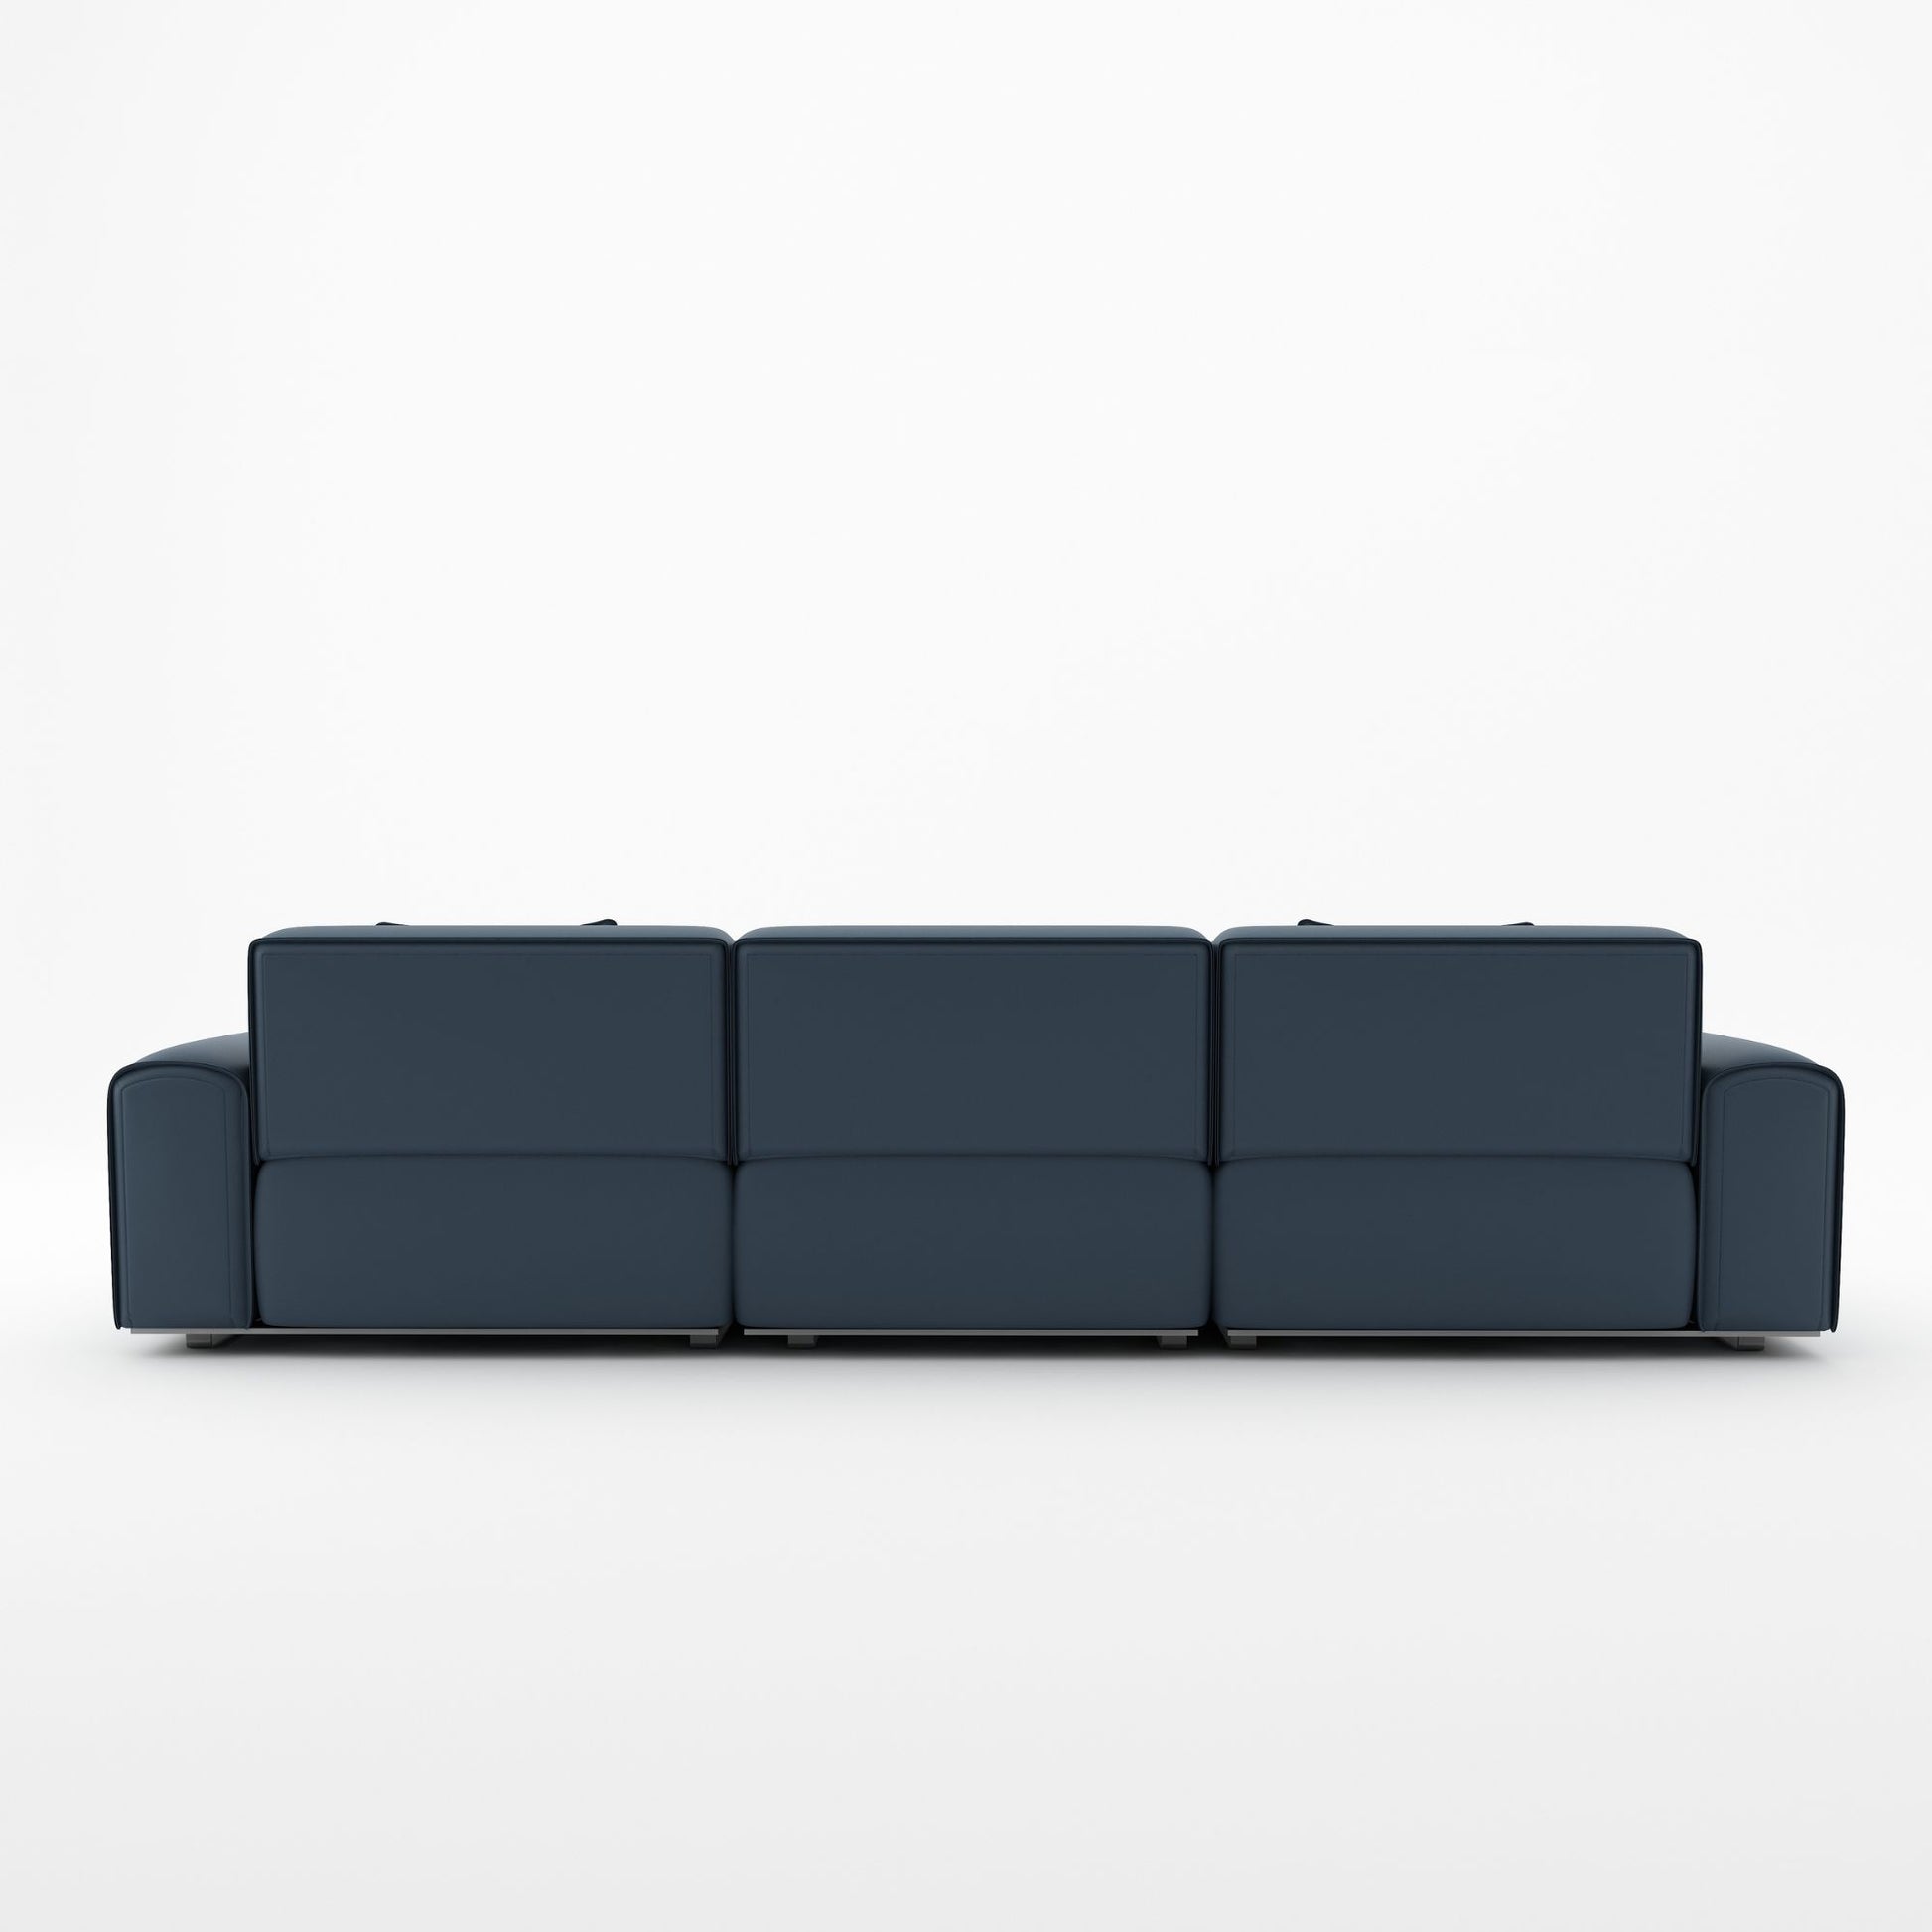 Colby blue top grain half leather 3 seat sofa